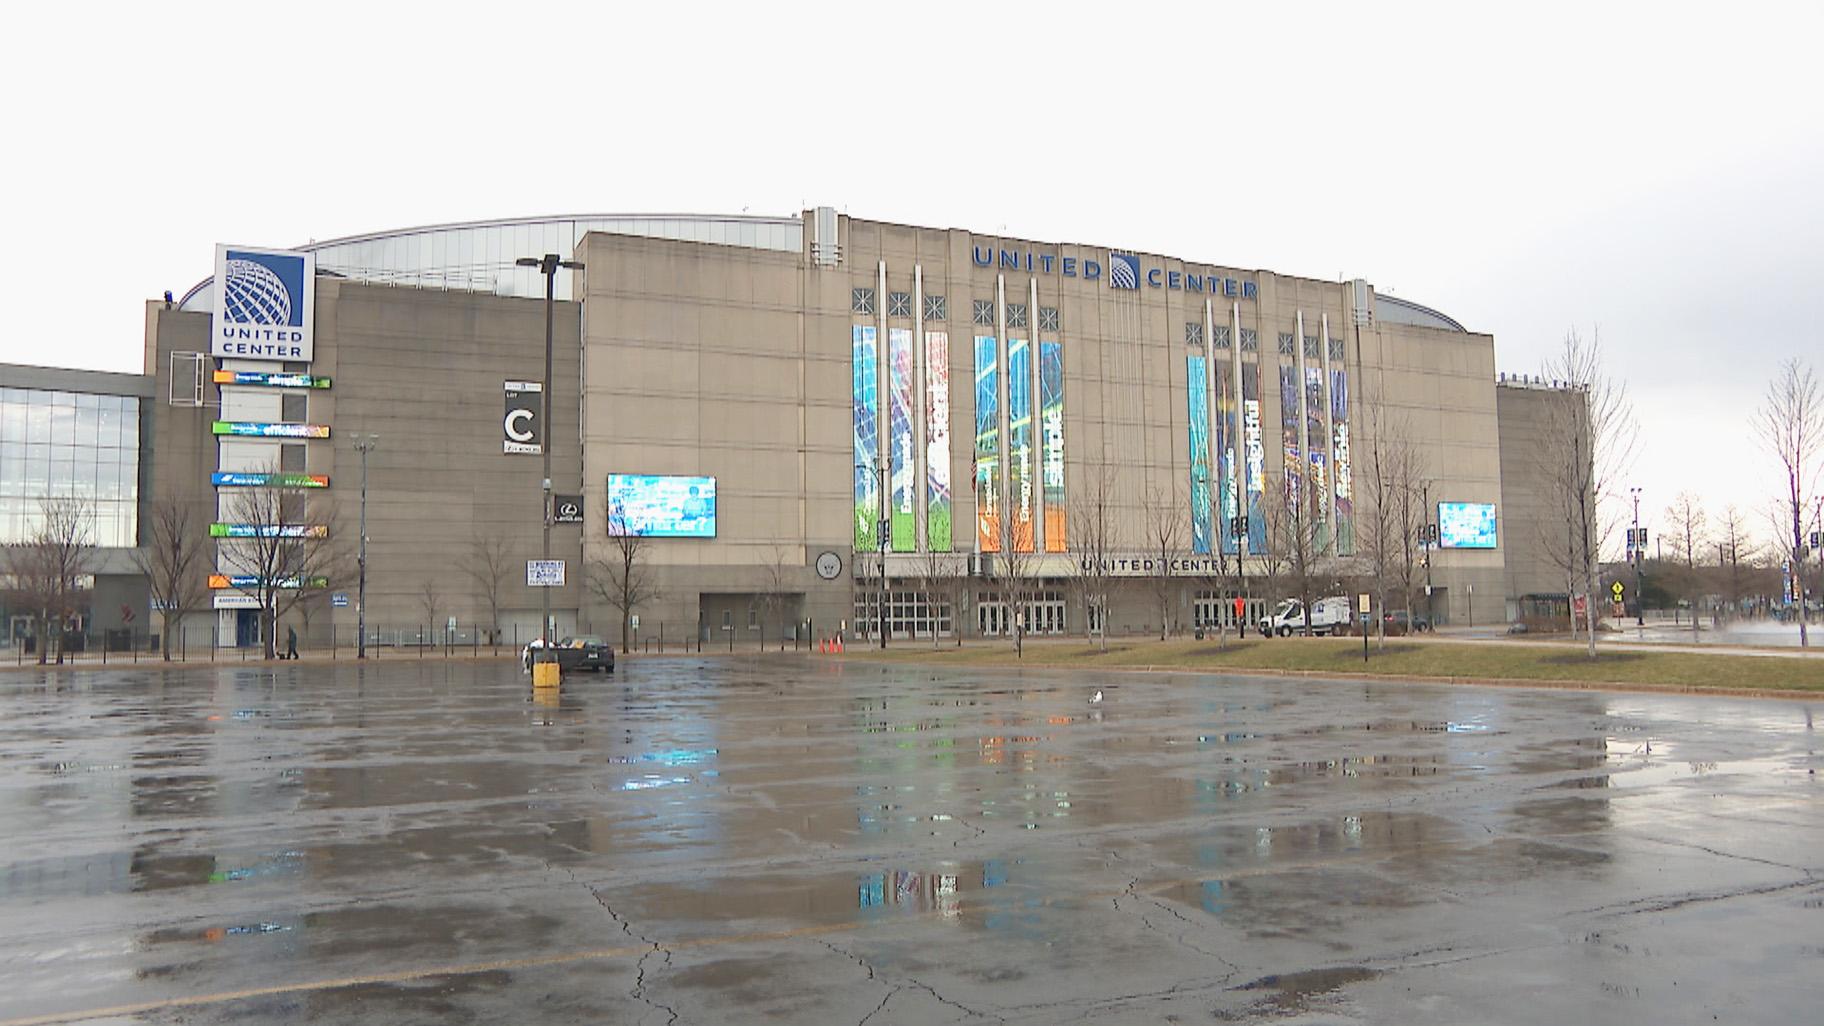 The United Center is pictured on March 6, 2023. (WTTW News)